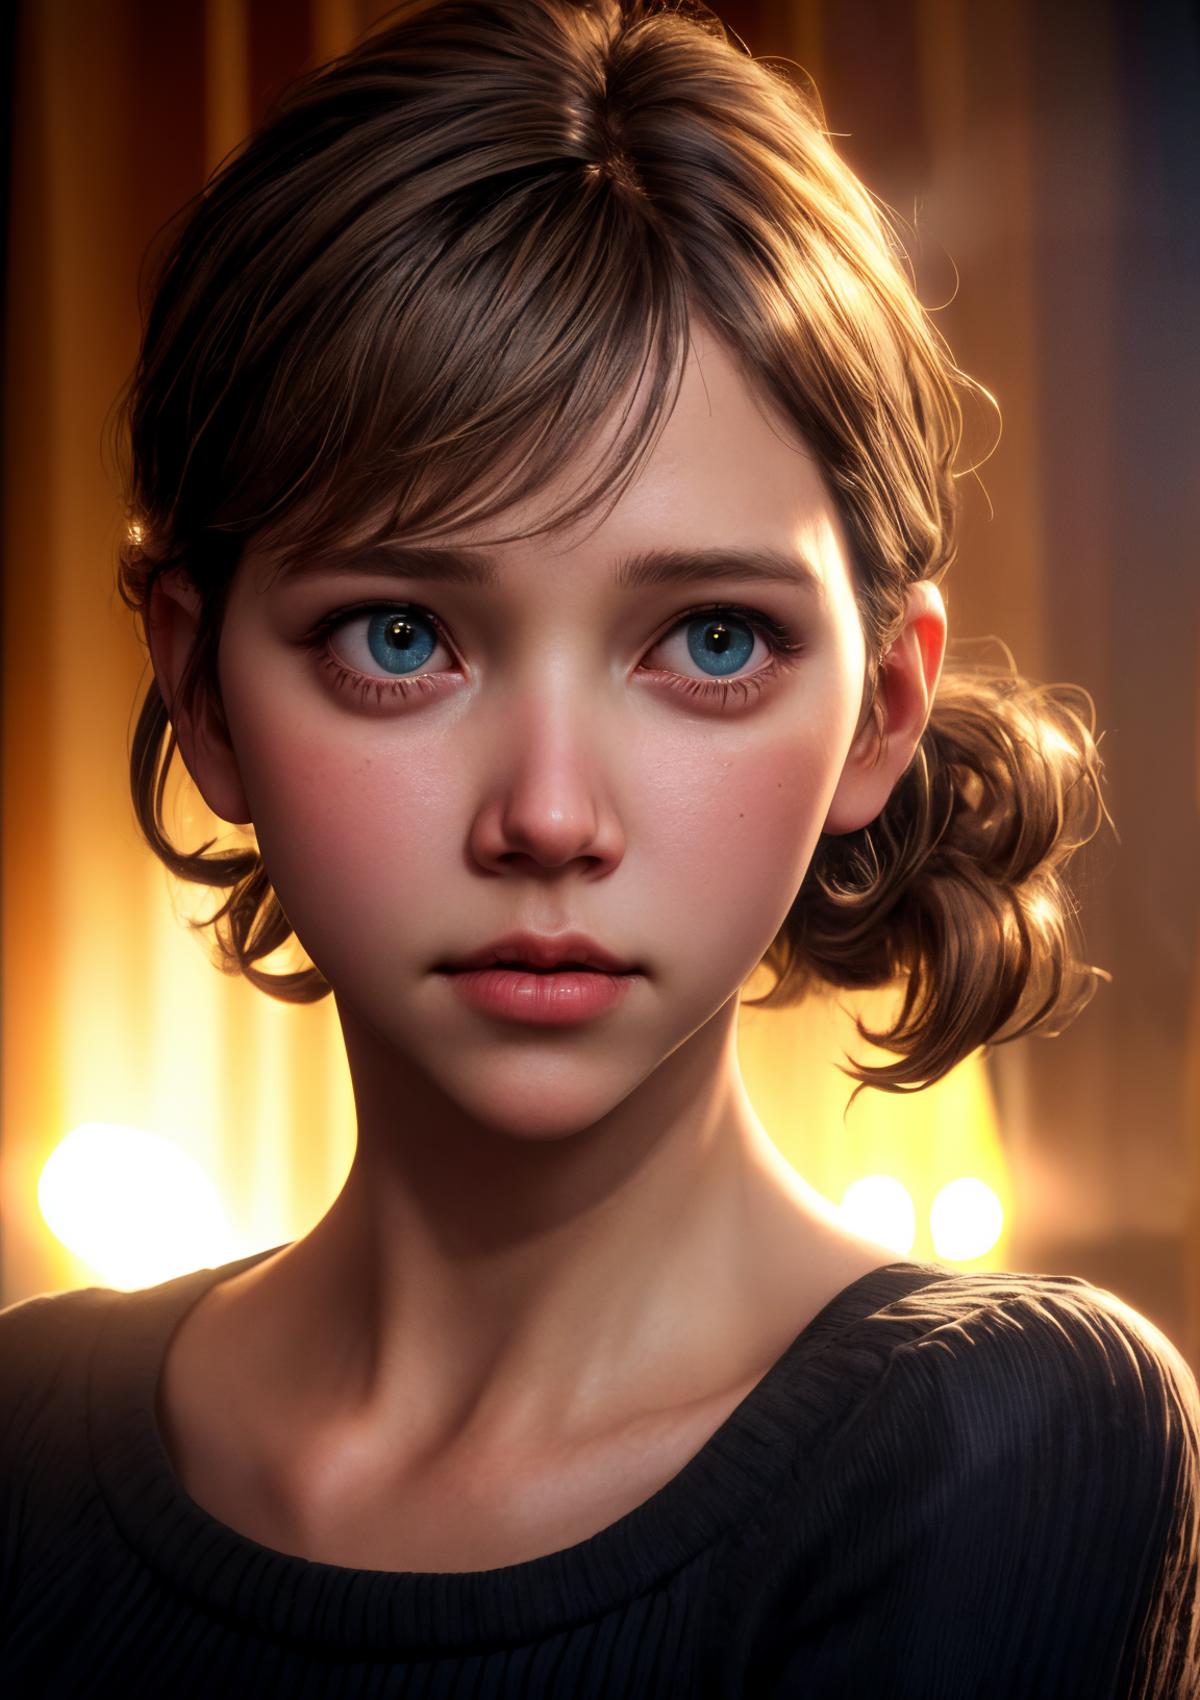 A young girl with blue eyes and a pink nose is looking forward.